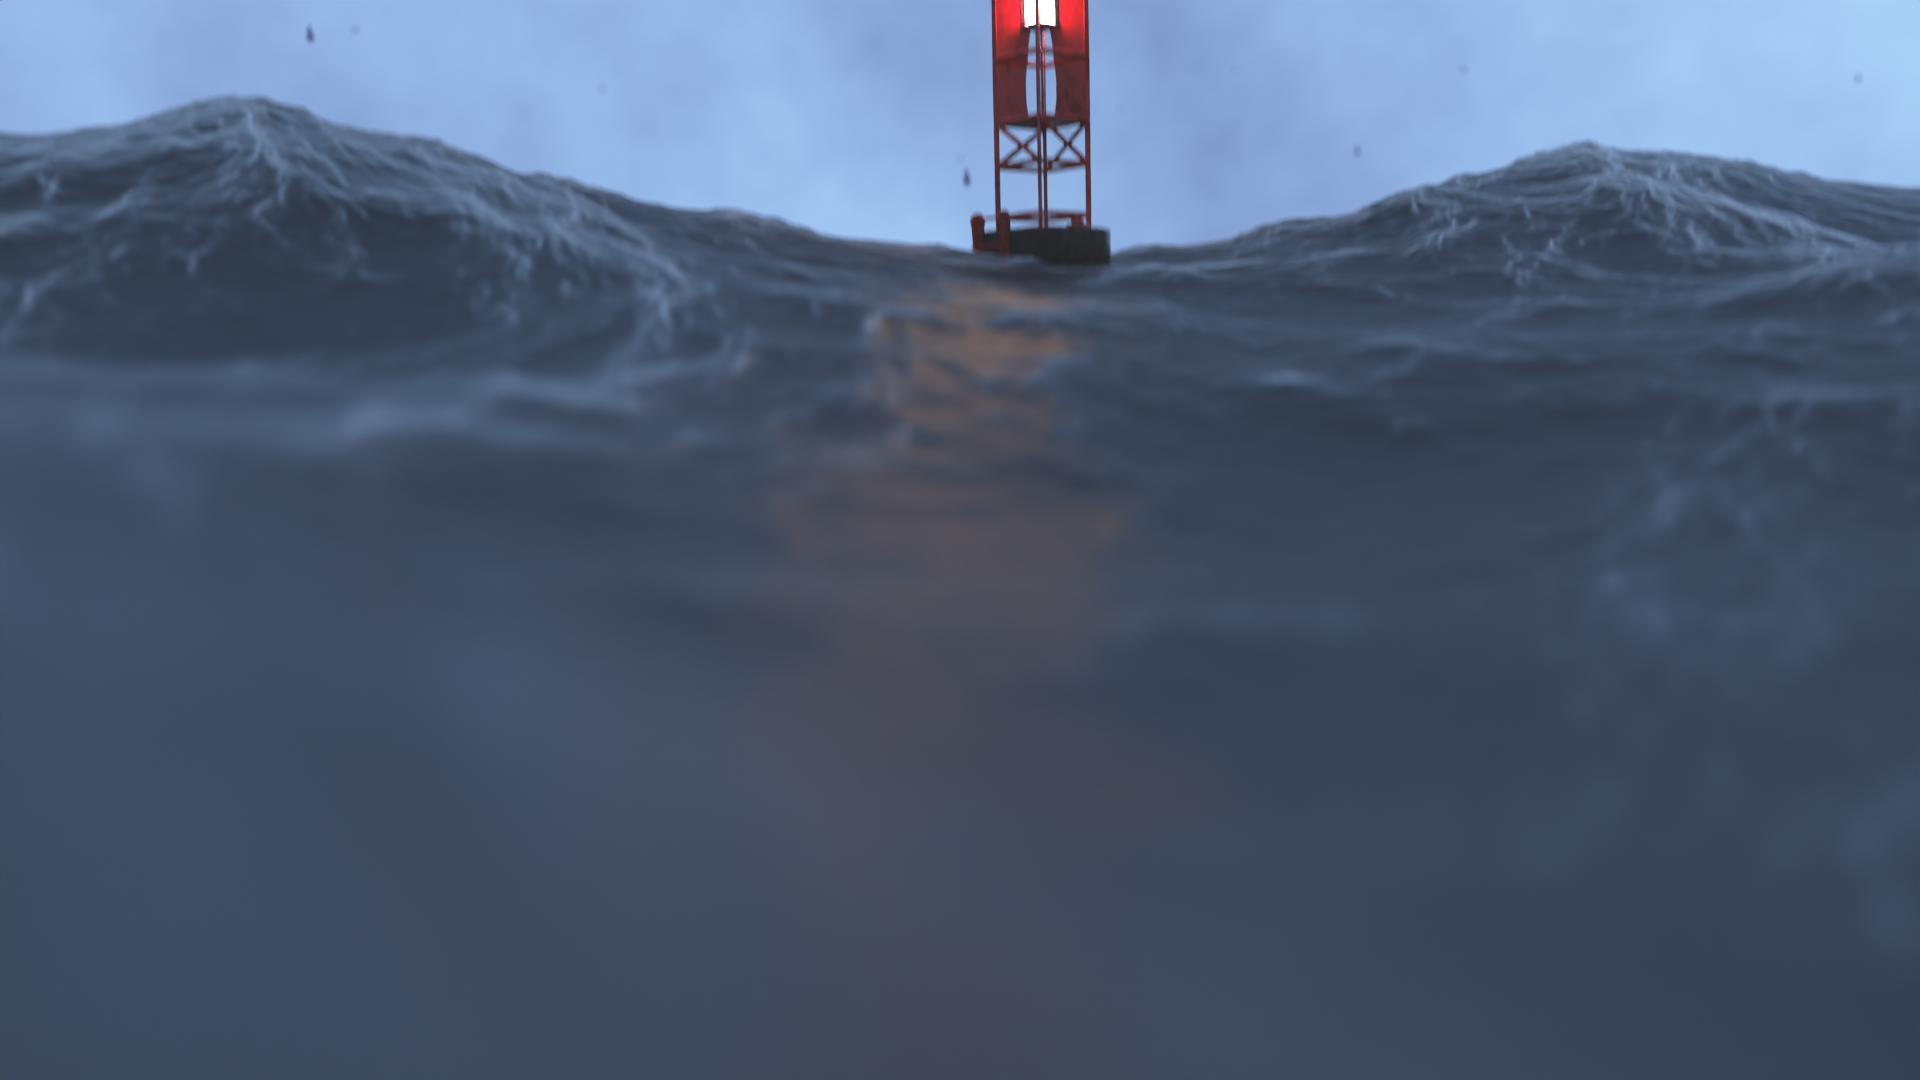 Ocean SImulation Blender 3.1.2 Cycles 3 preview image 2